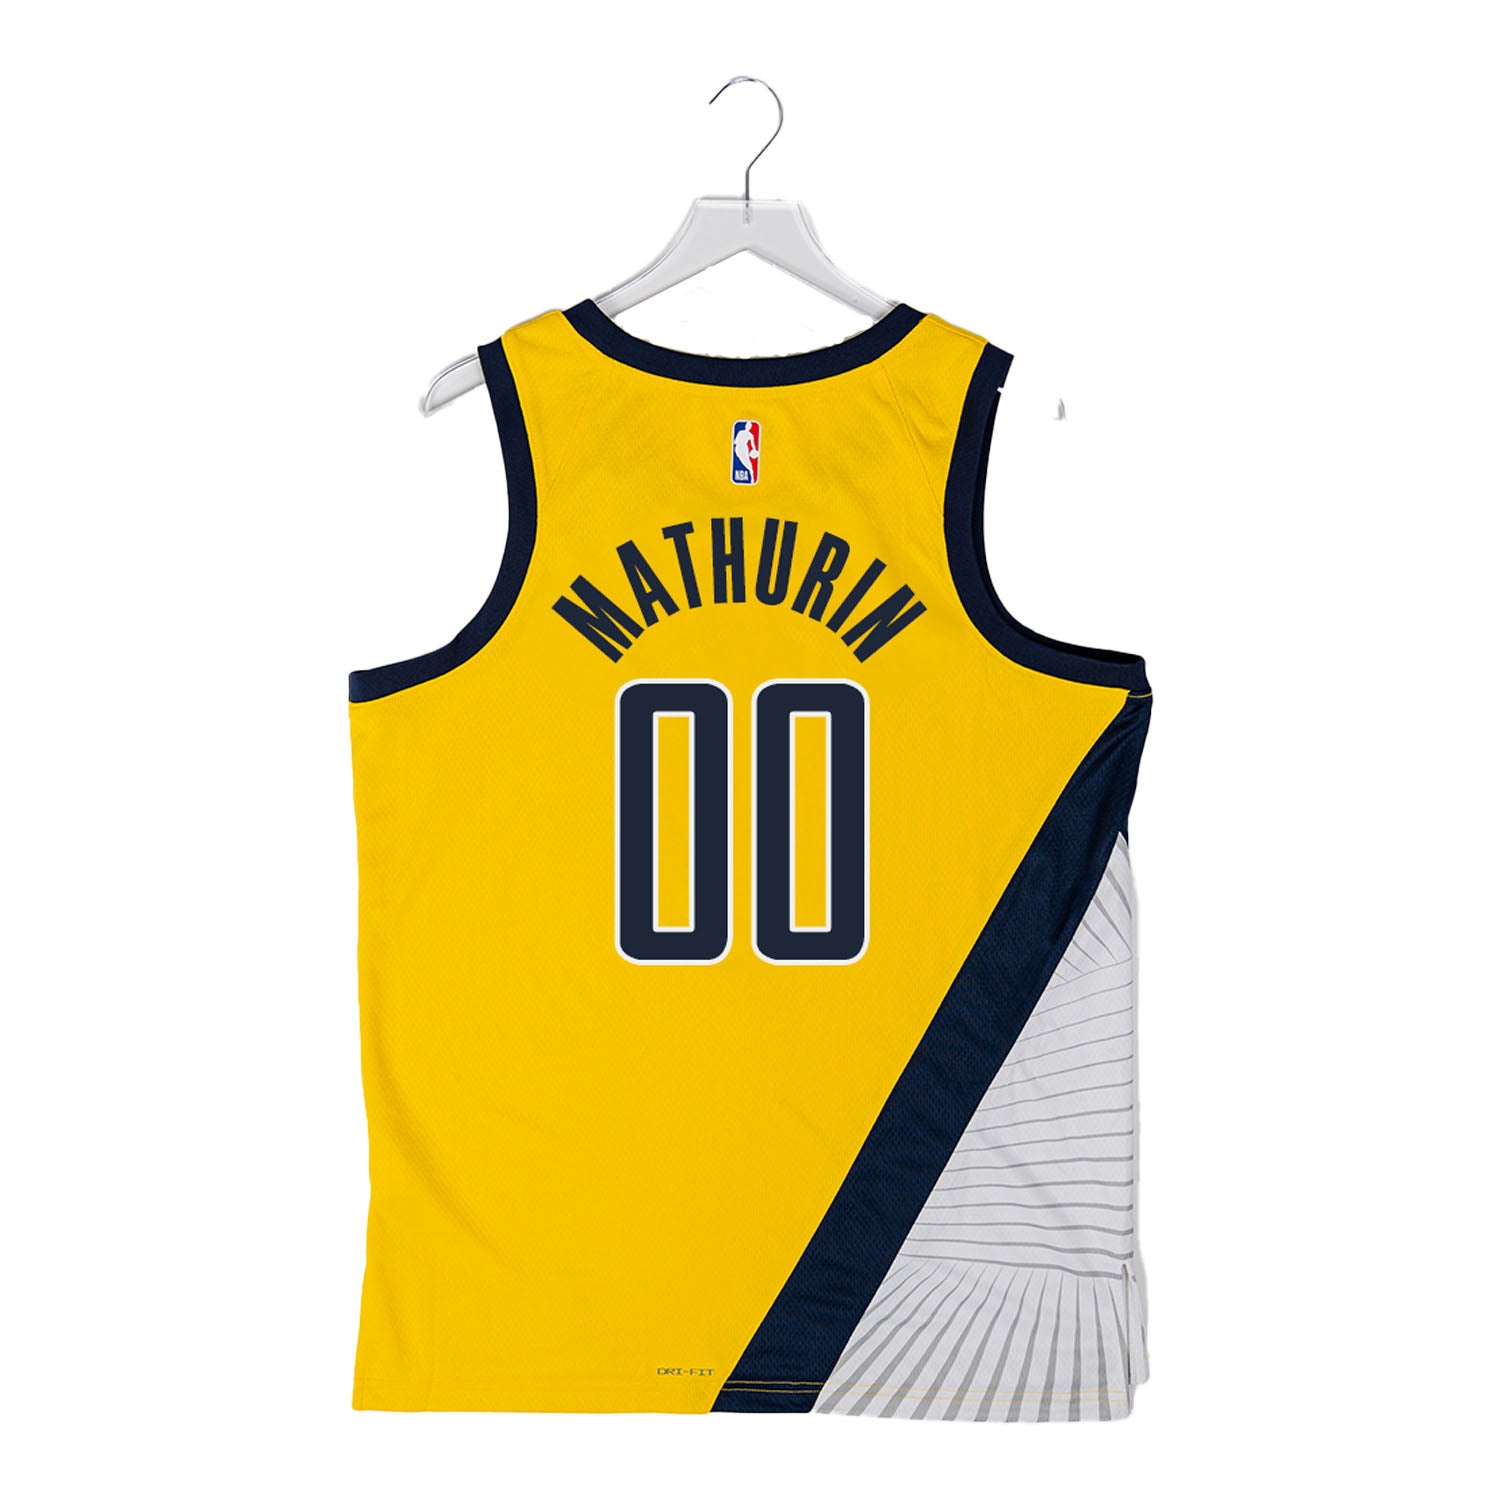 2023 Pacers Basketball Jersey Benedict Mathurin Myles33 Men Soccer Jersey  Set - China Jersey and Football price